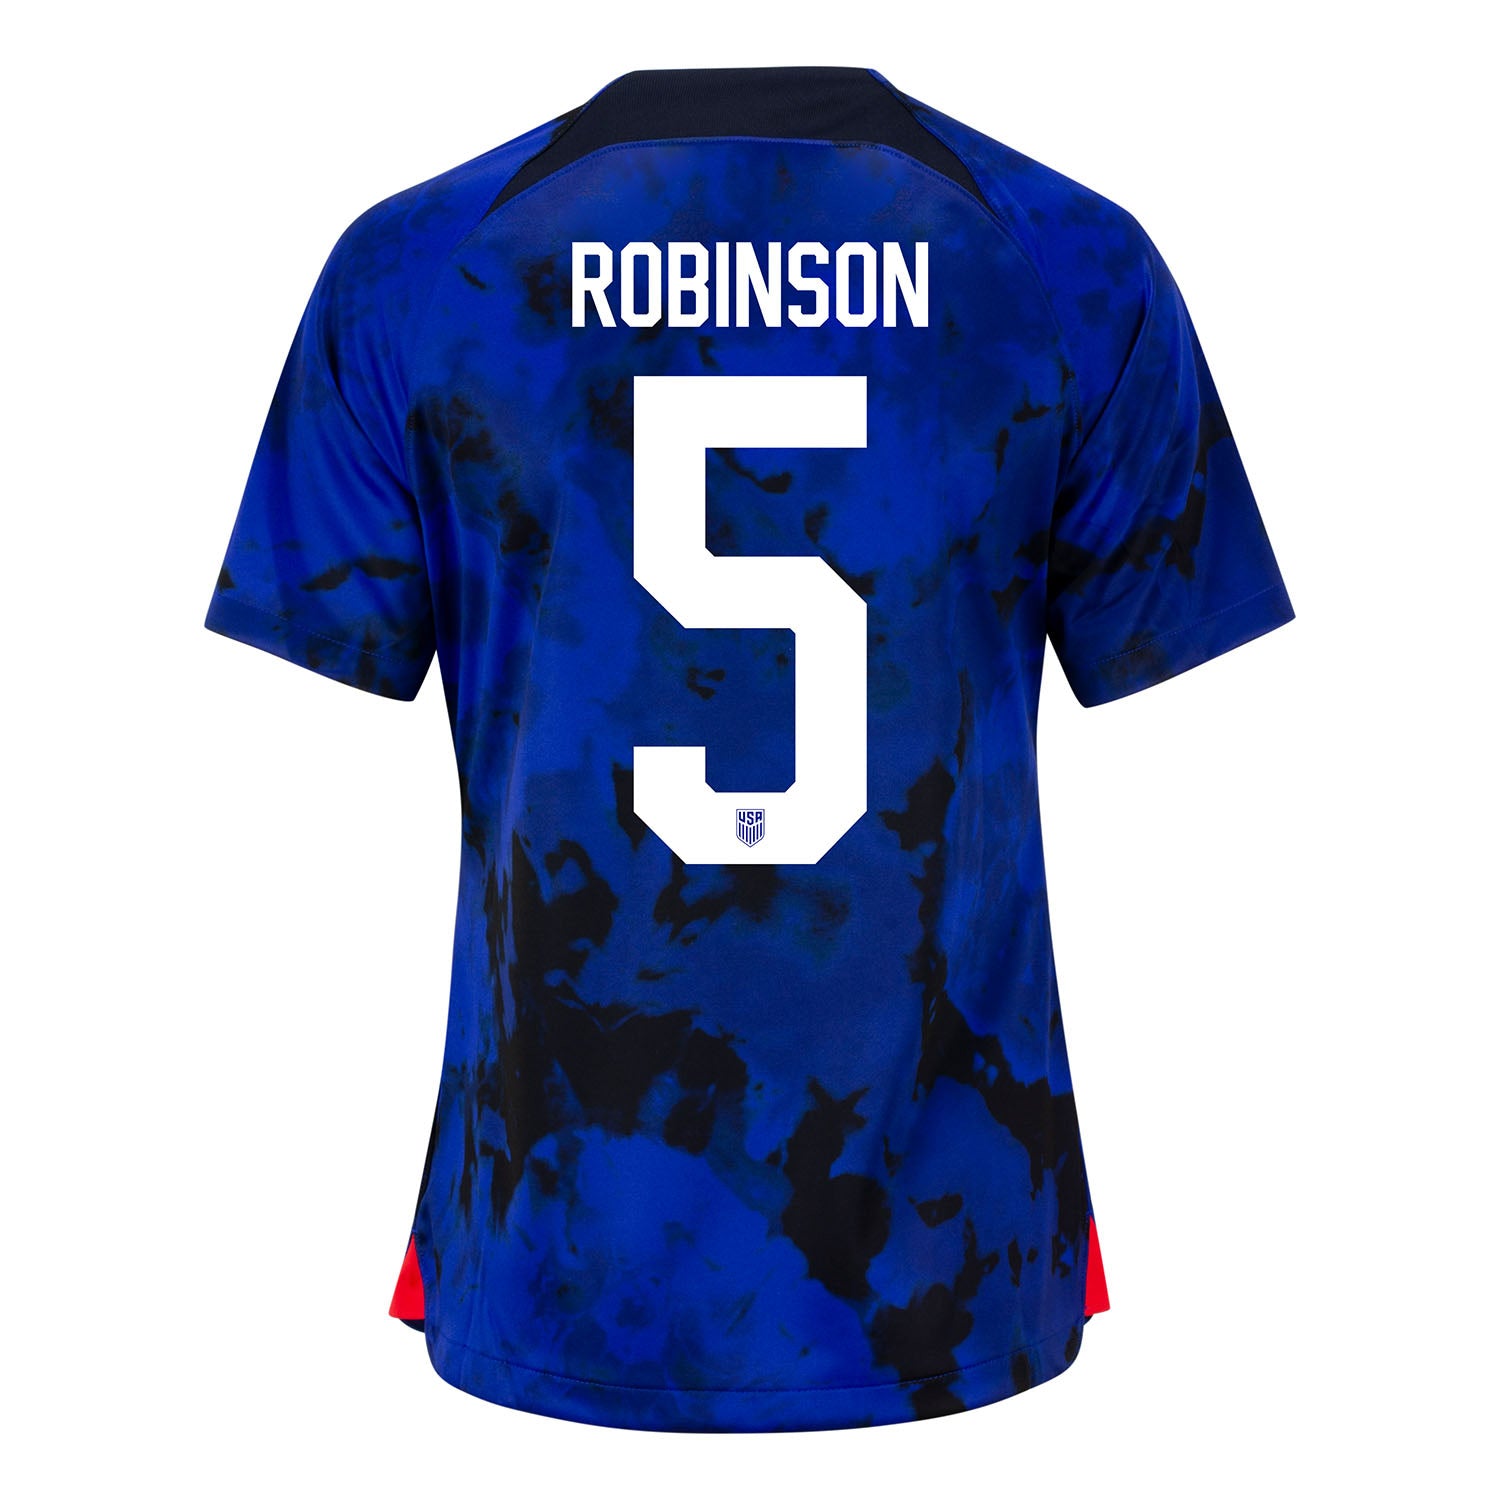 Antonee Robinson Jerseys And Merch Official Home And 2022 Jerseys Official Us Soccer Store